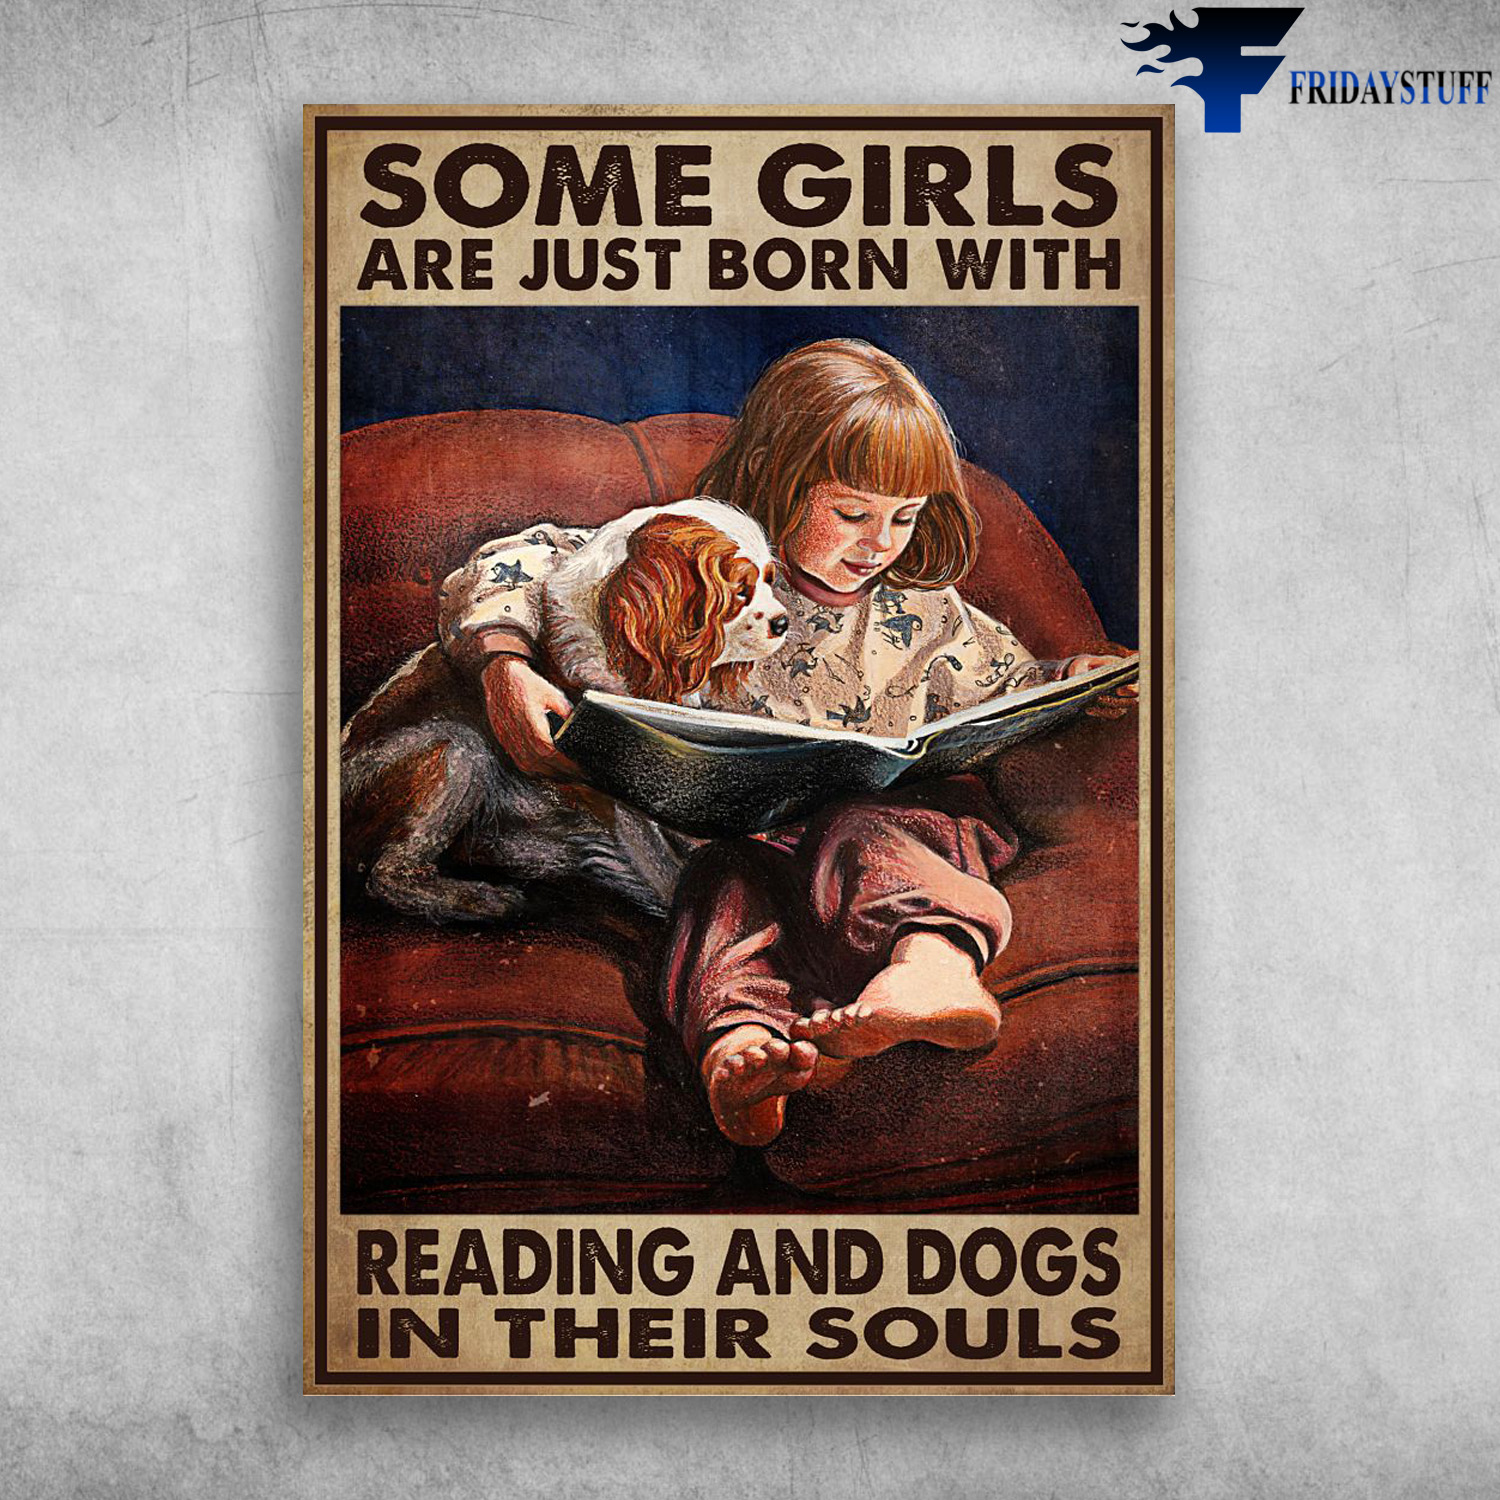 Little Reading Book With Dog - Some Girls Are Just Born With Reading And Dogs, In Their Souls